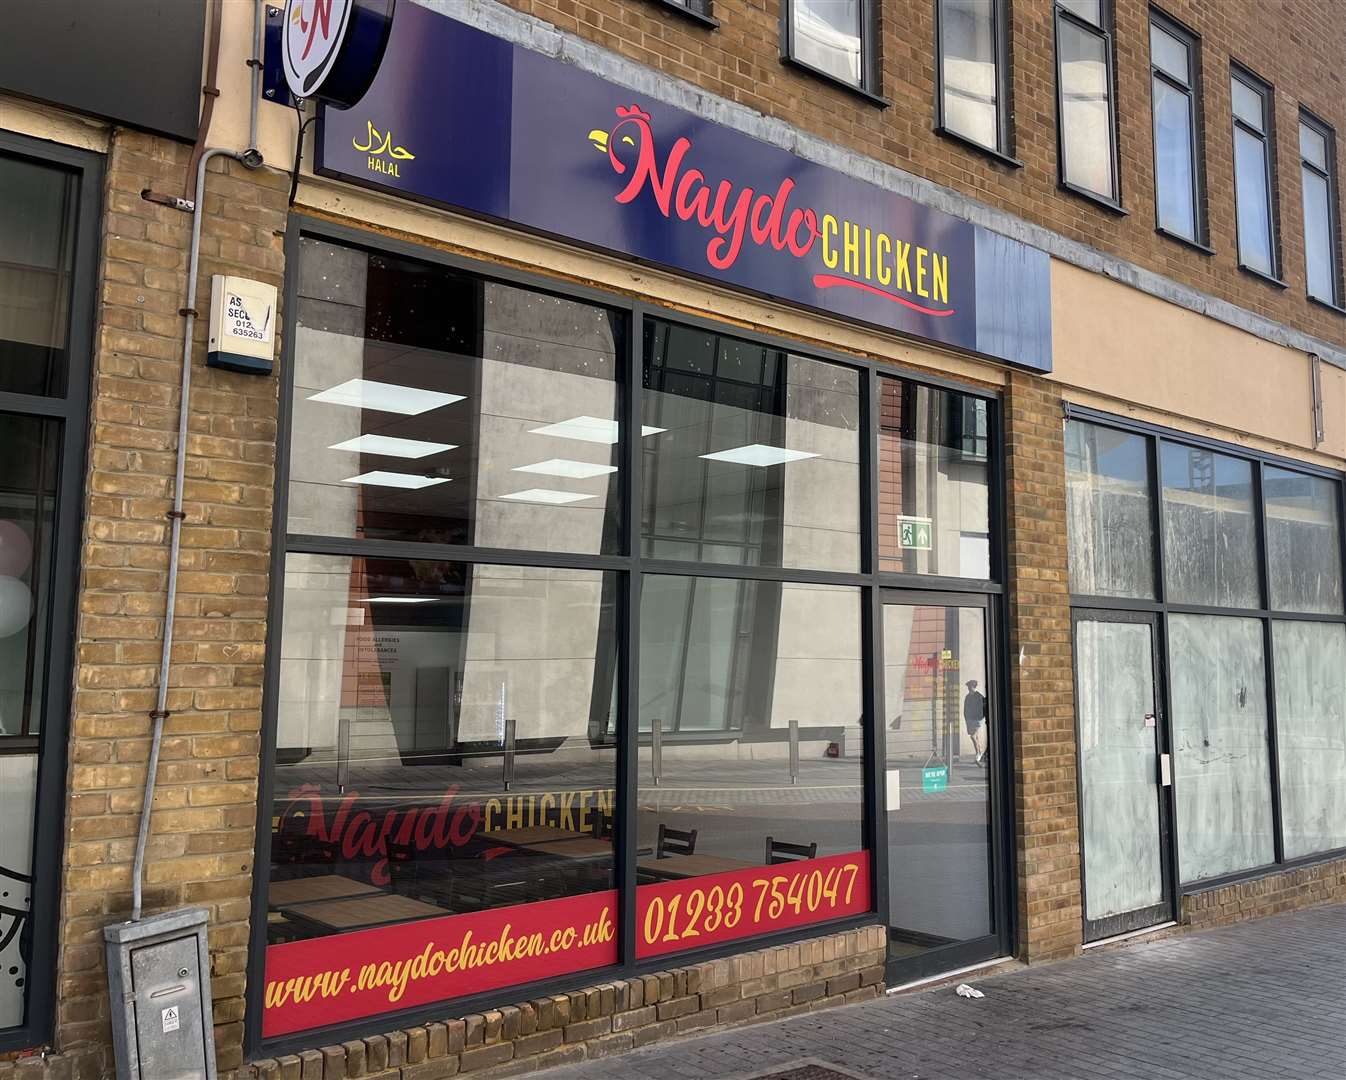 Naydo chicken has just opened at the bottom of Bank Street